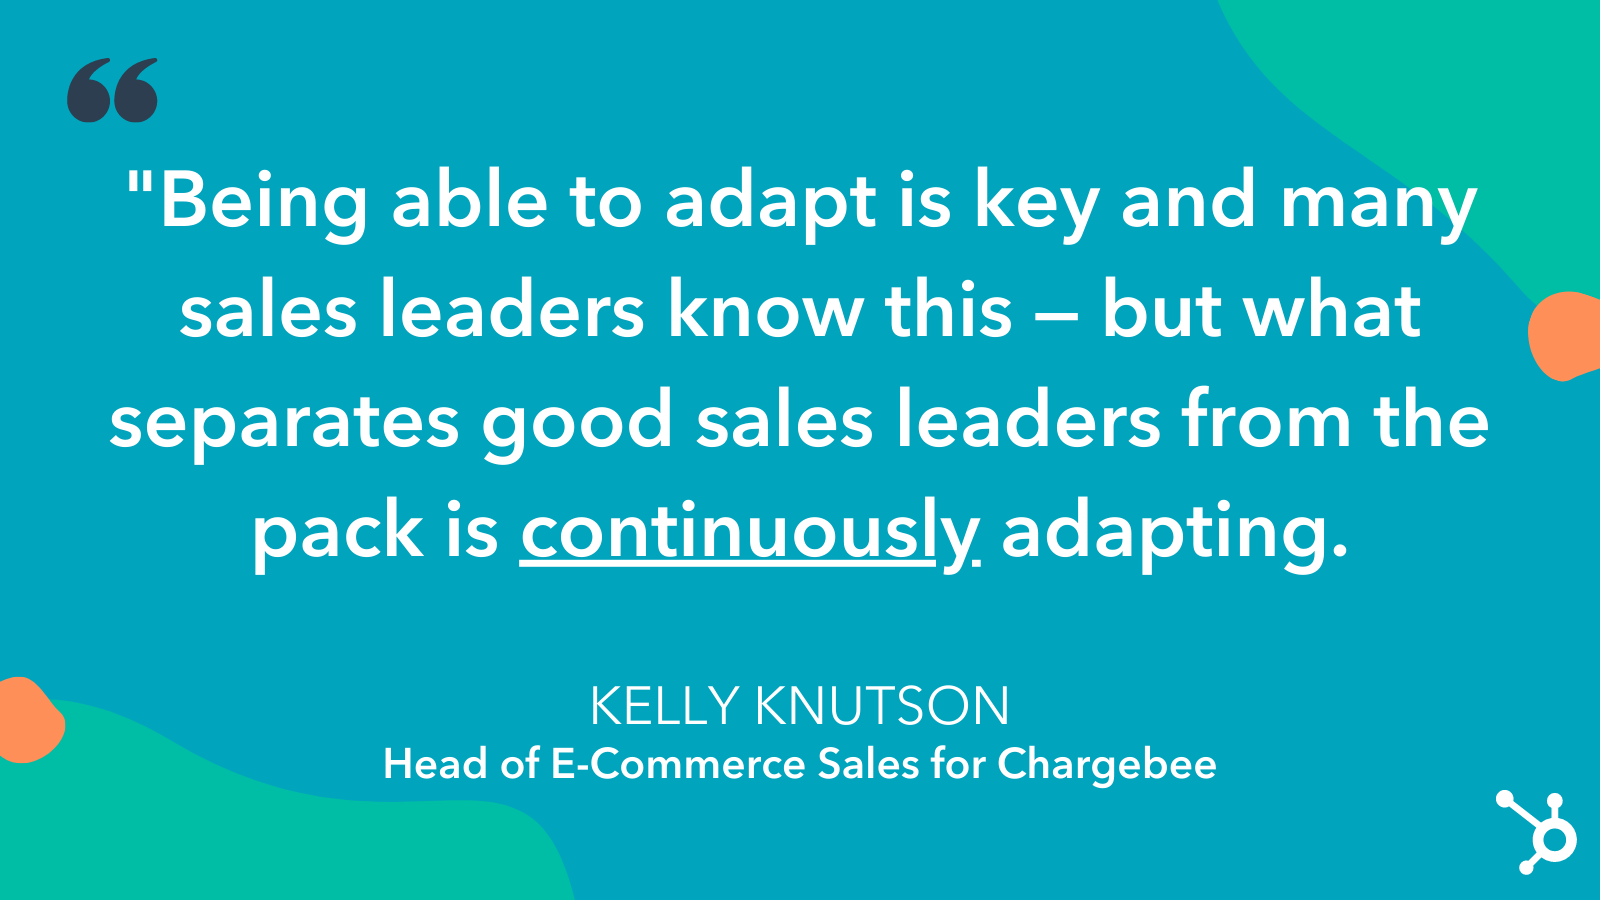 kelly knutson quote on virtual sales leadership